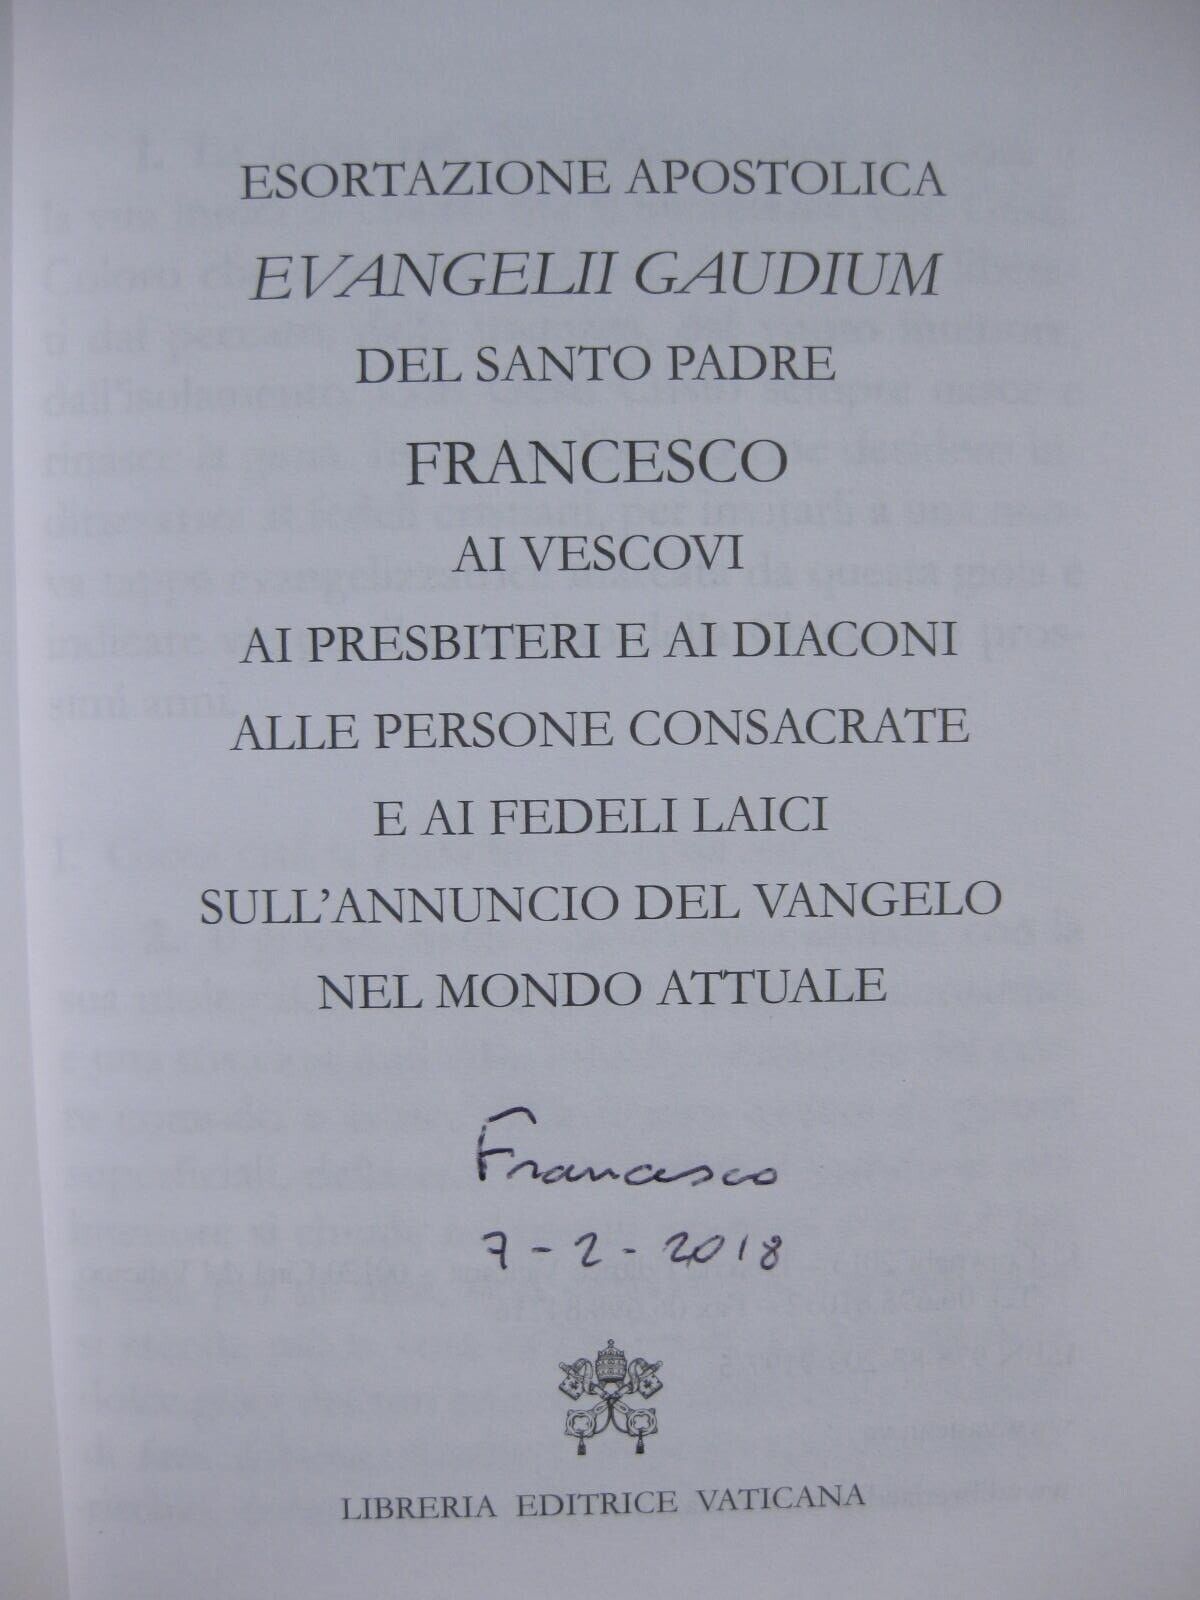 Pope Francis autograph / signed book re: Evangelii gaudium